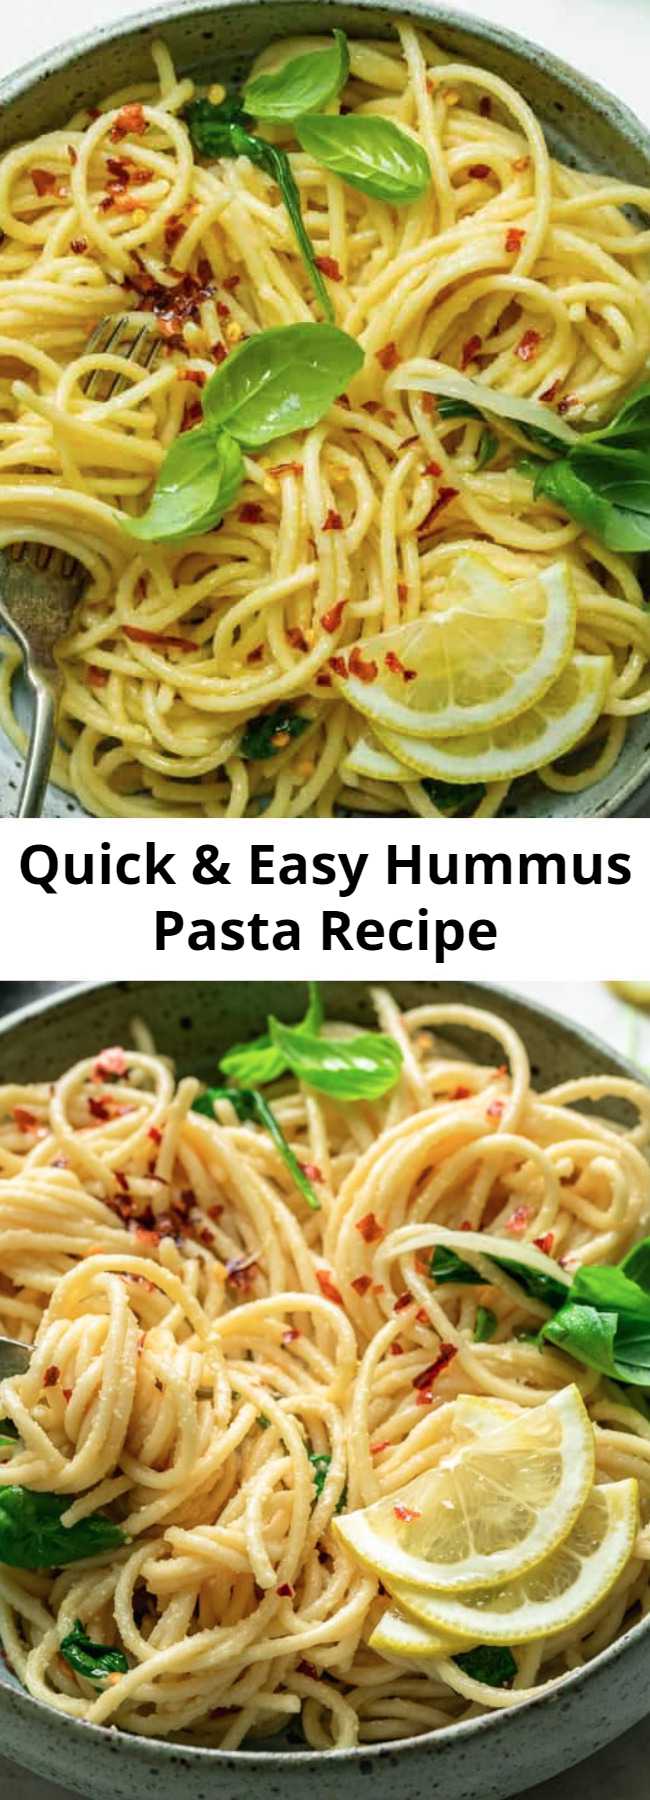 Quick & Easy Hummus Pasta Recipe - This creamy vegan Hummus Pasta is a healthy Mediterranean inspired recipe! It's all made in one pot and ready in 15 minutes - perfect for a weeknight meal! #vegan #dinner #weeknight